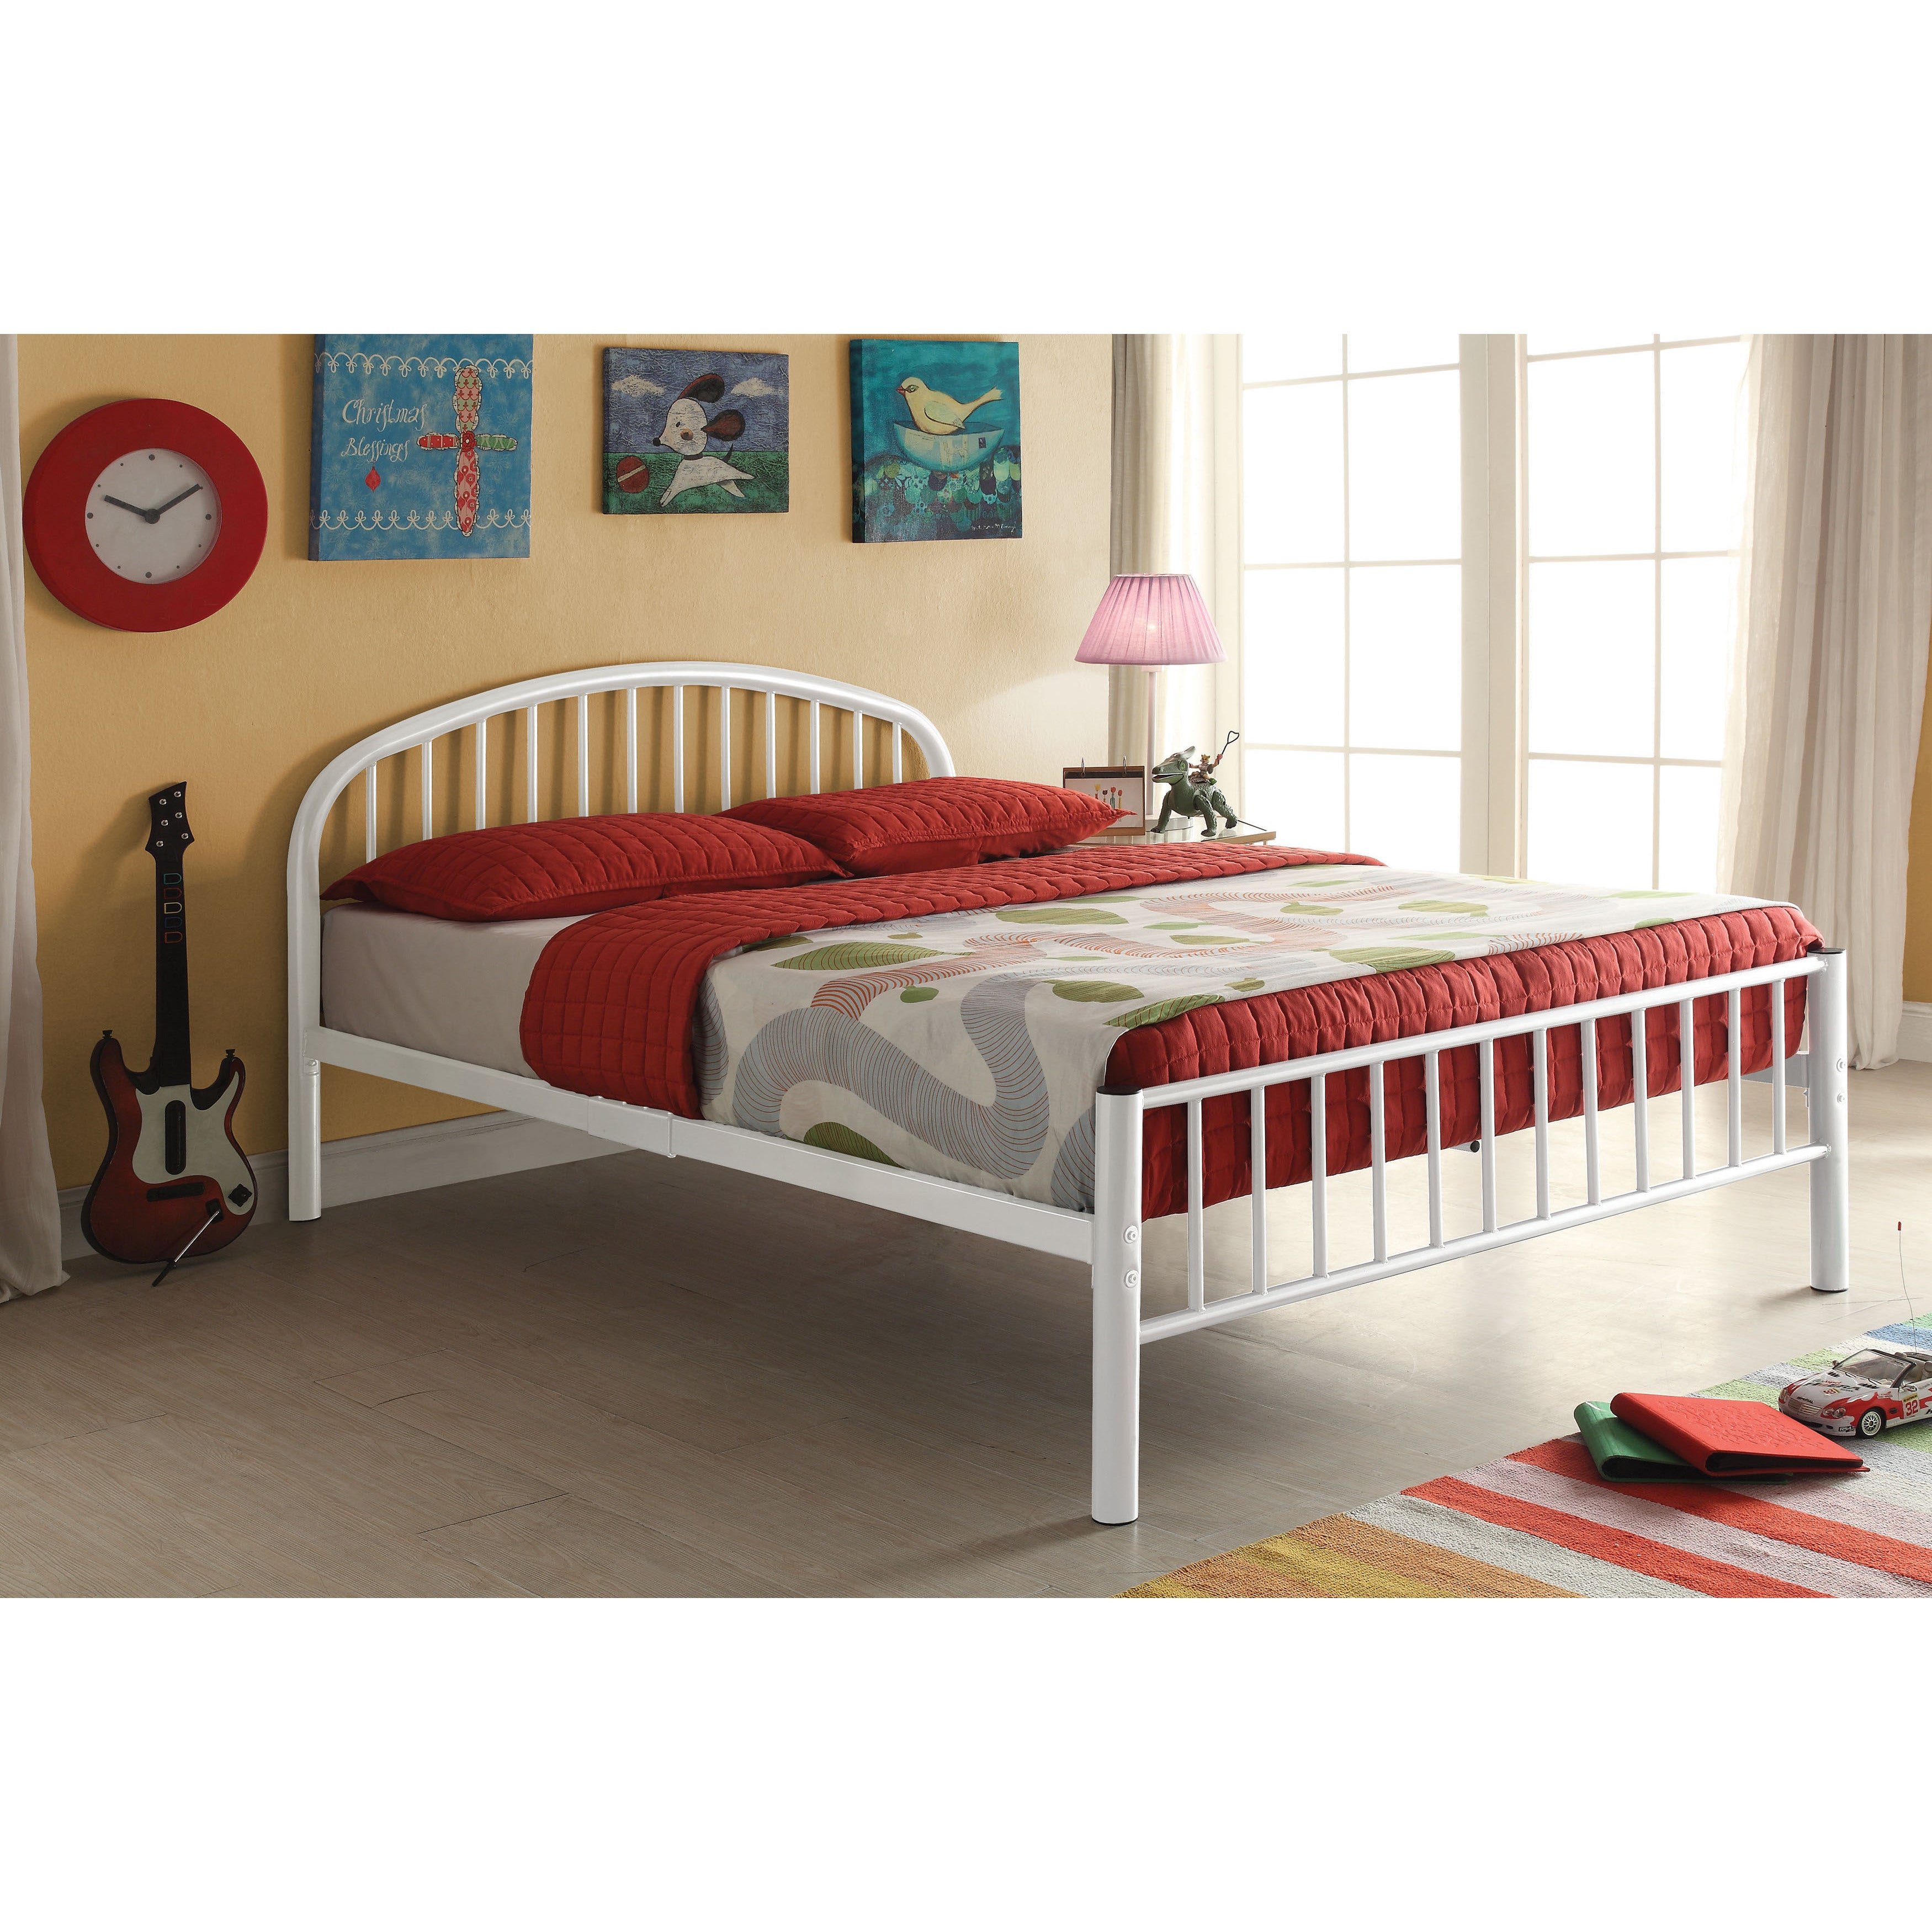 Cheap Bedroom Set Twin Elegant Cailyn White Twin Bed